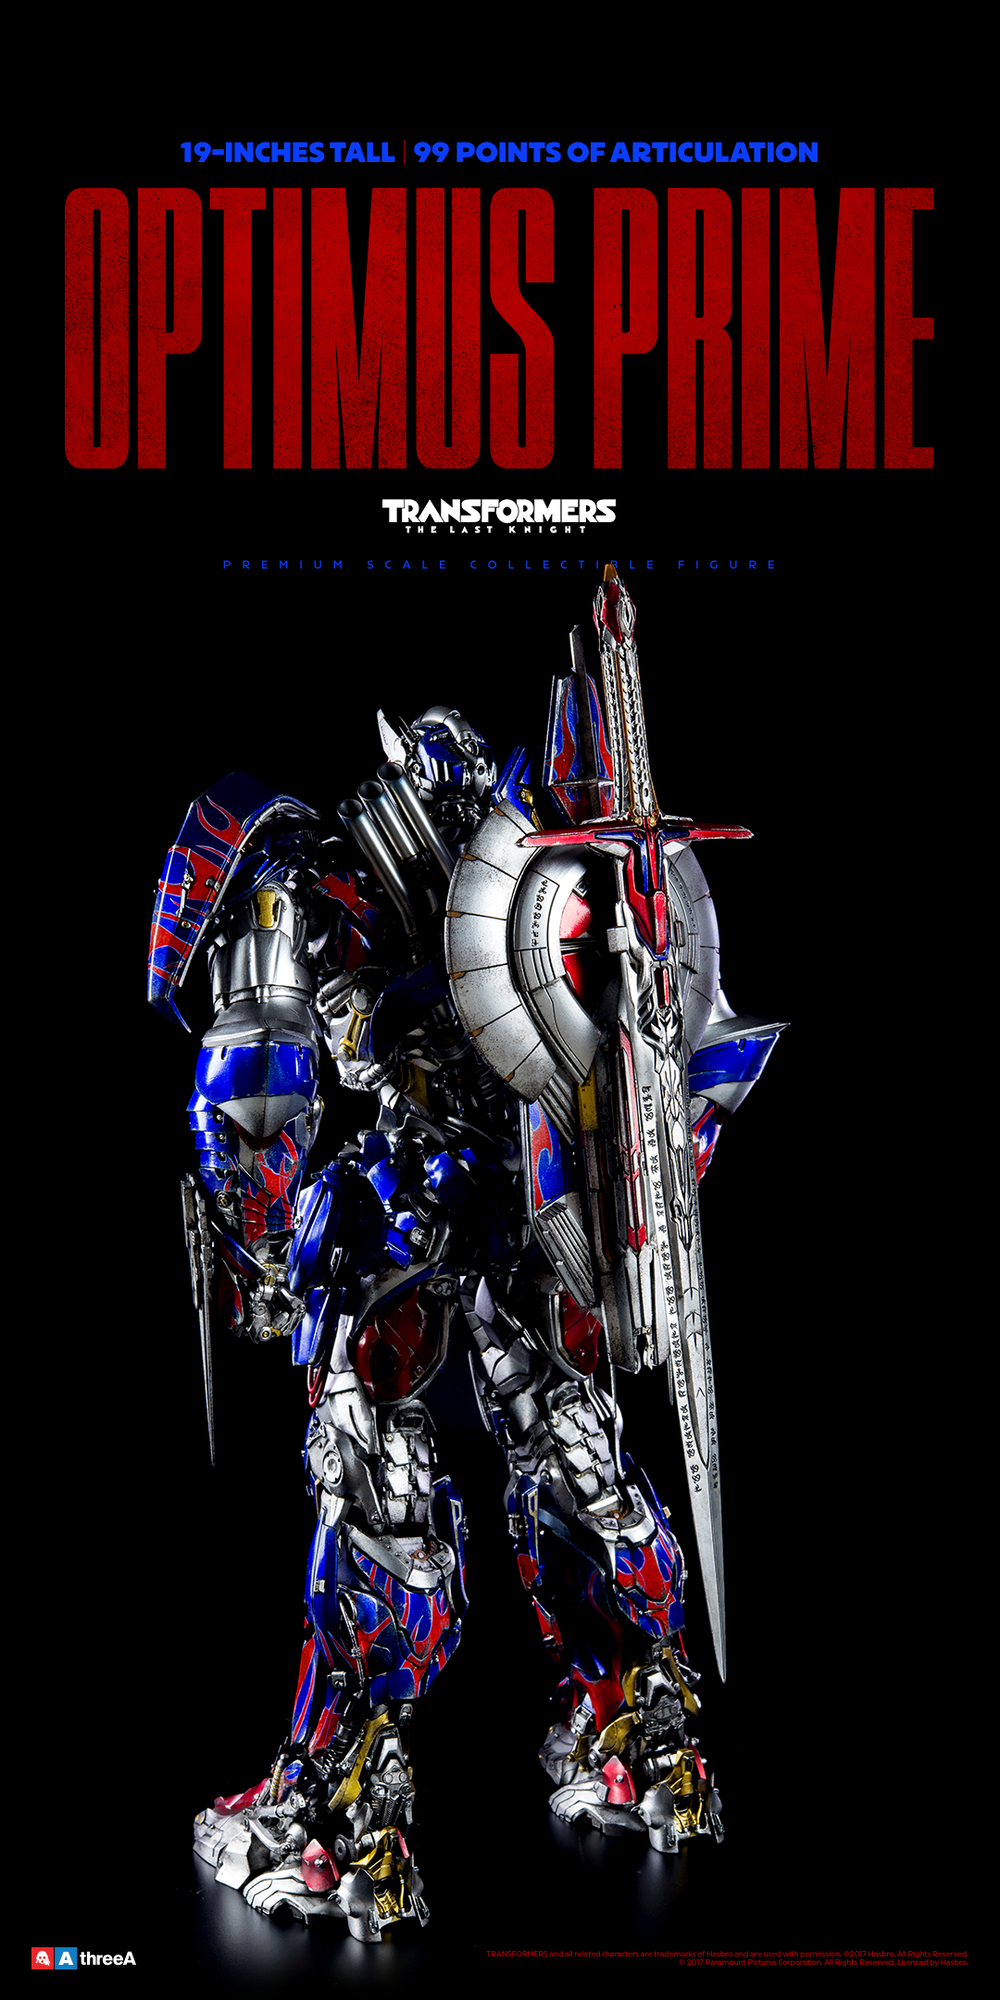 3a transformers the last knight